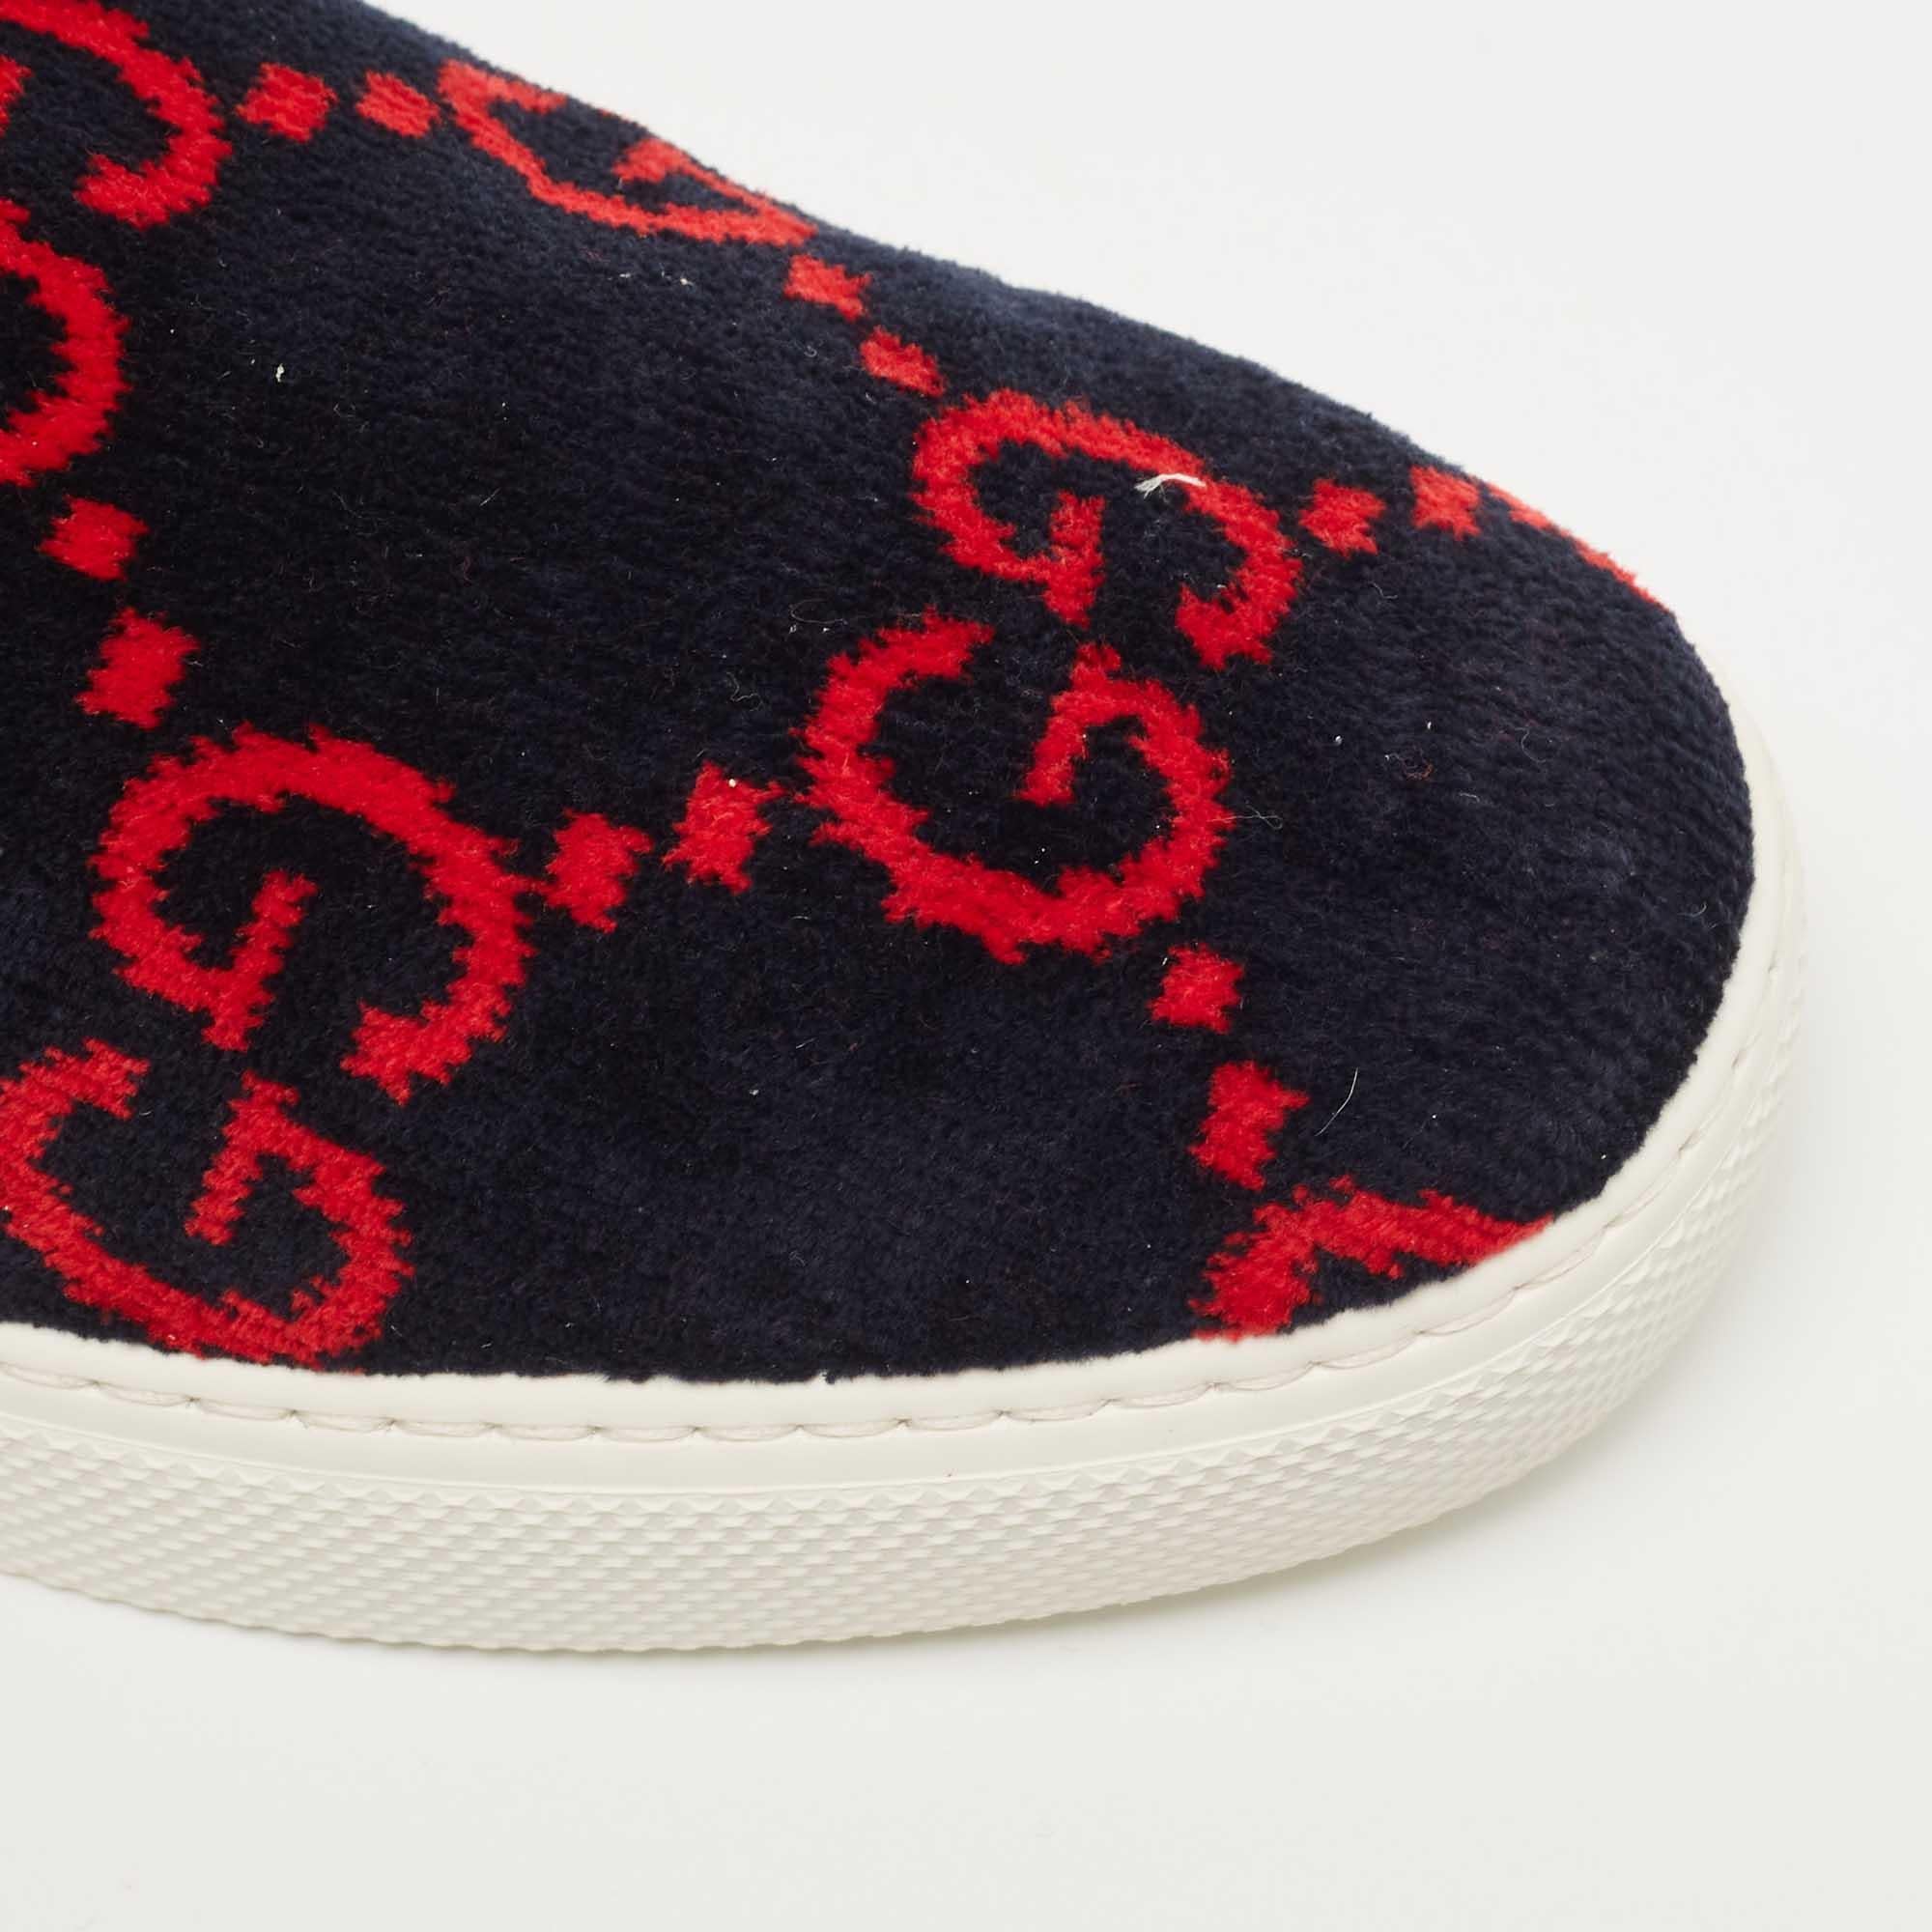 Gucci Navy Blue/Red GG Terry Fabric Slip On Sneakers Size 39.5 3